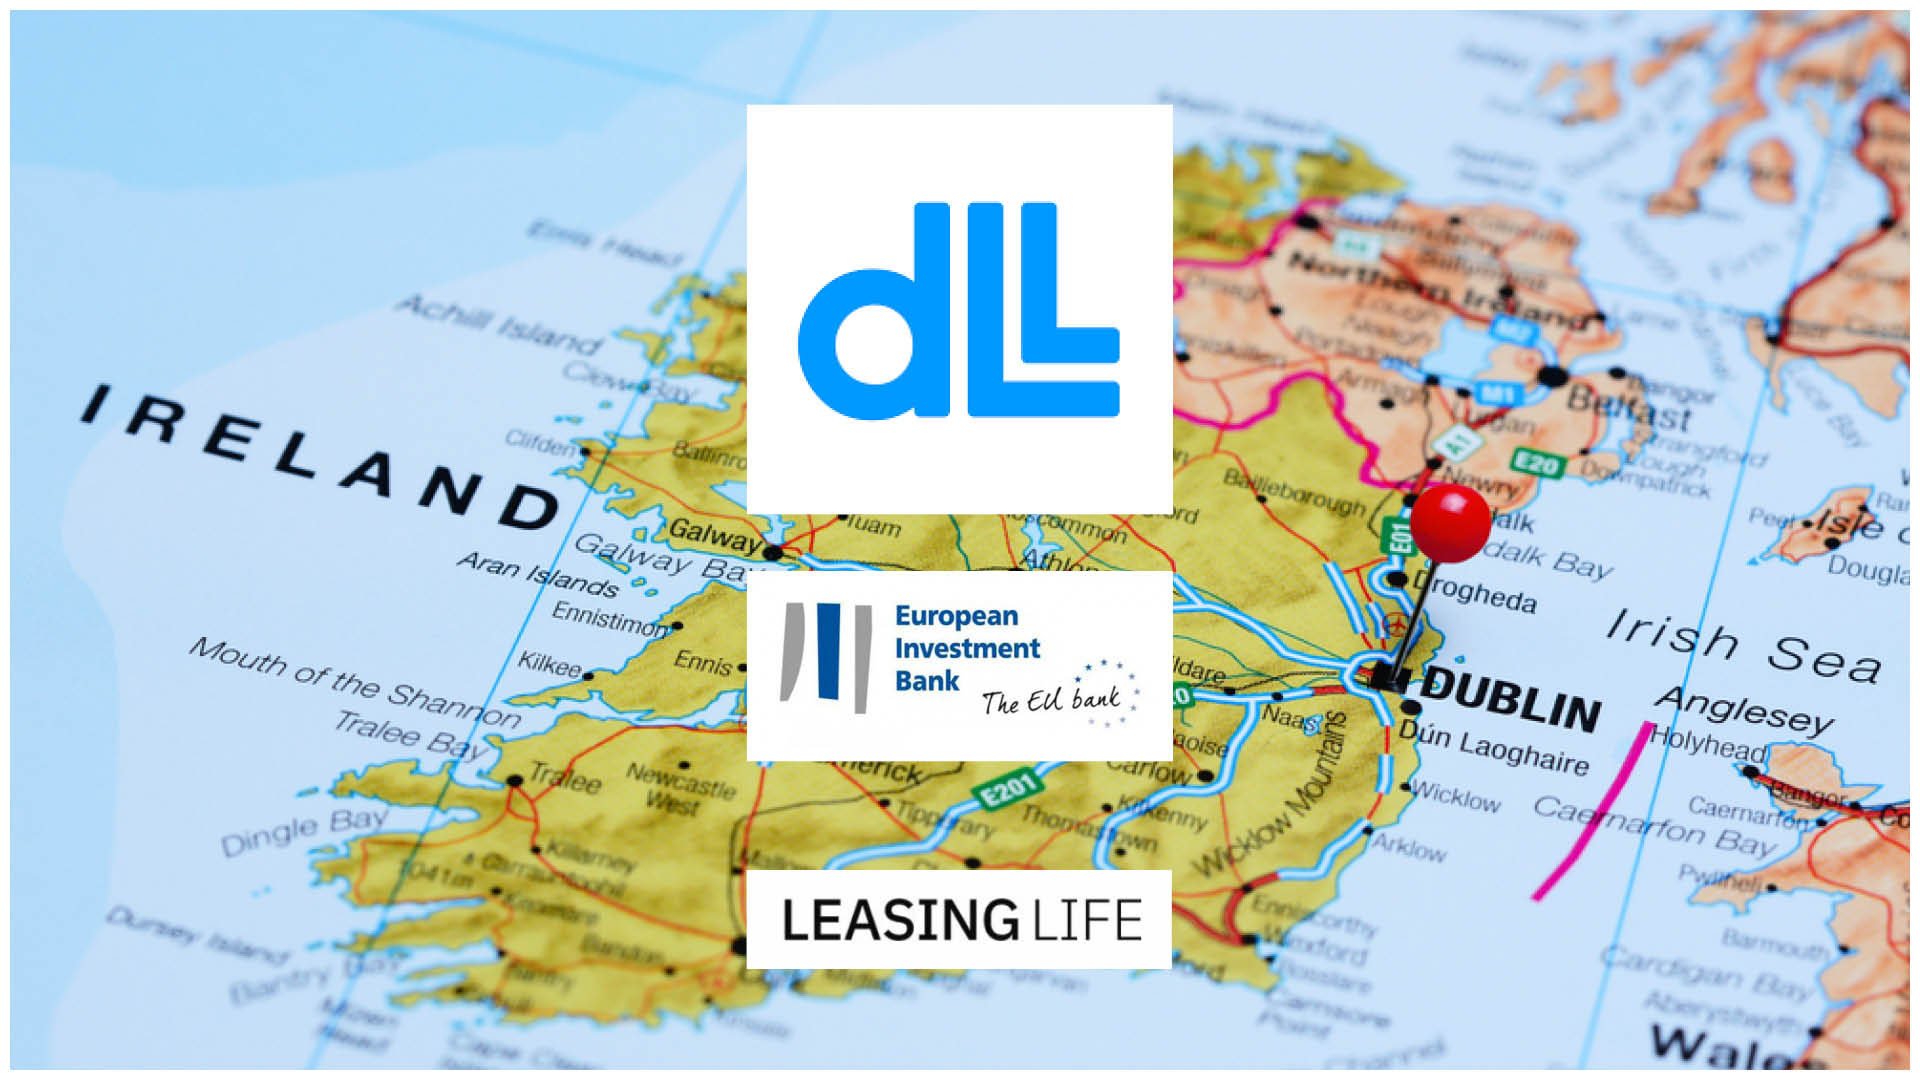 EIB and DLL Ireland in €80m green investment partnership